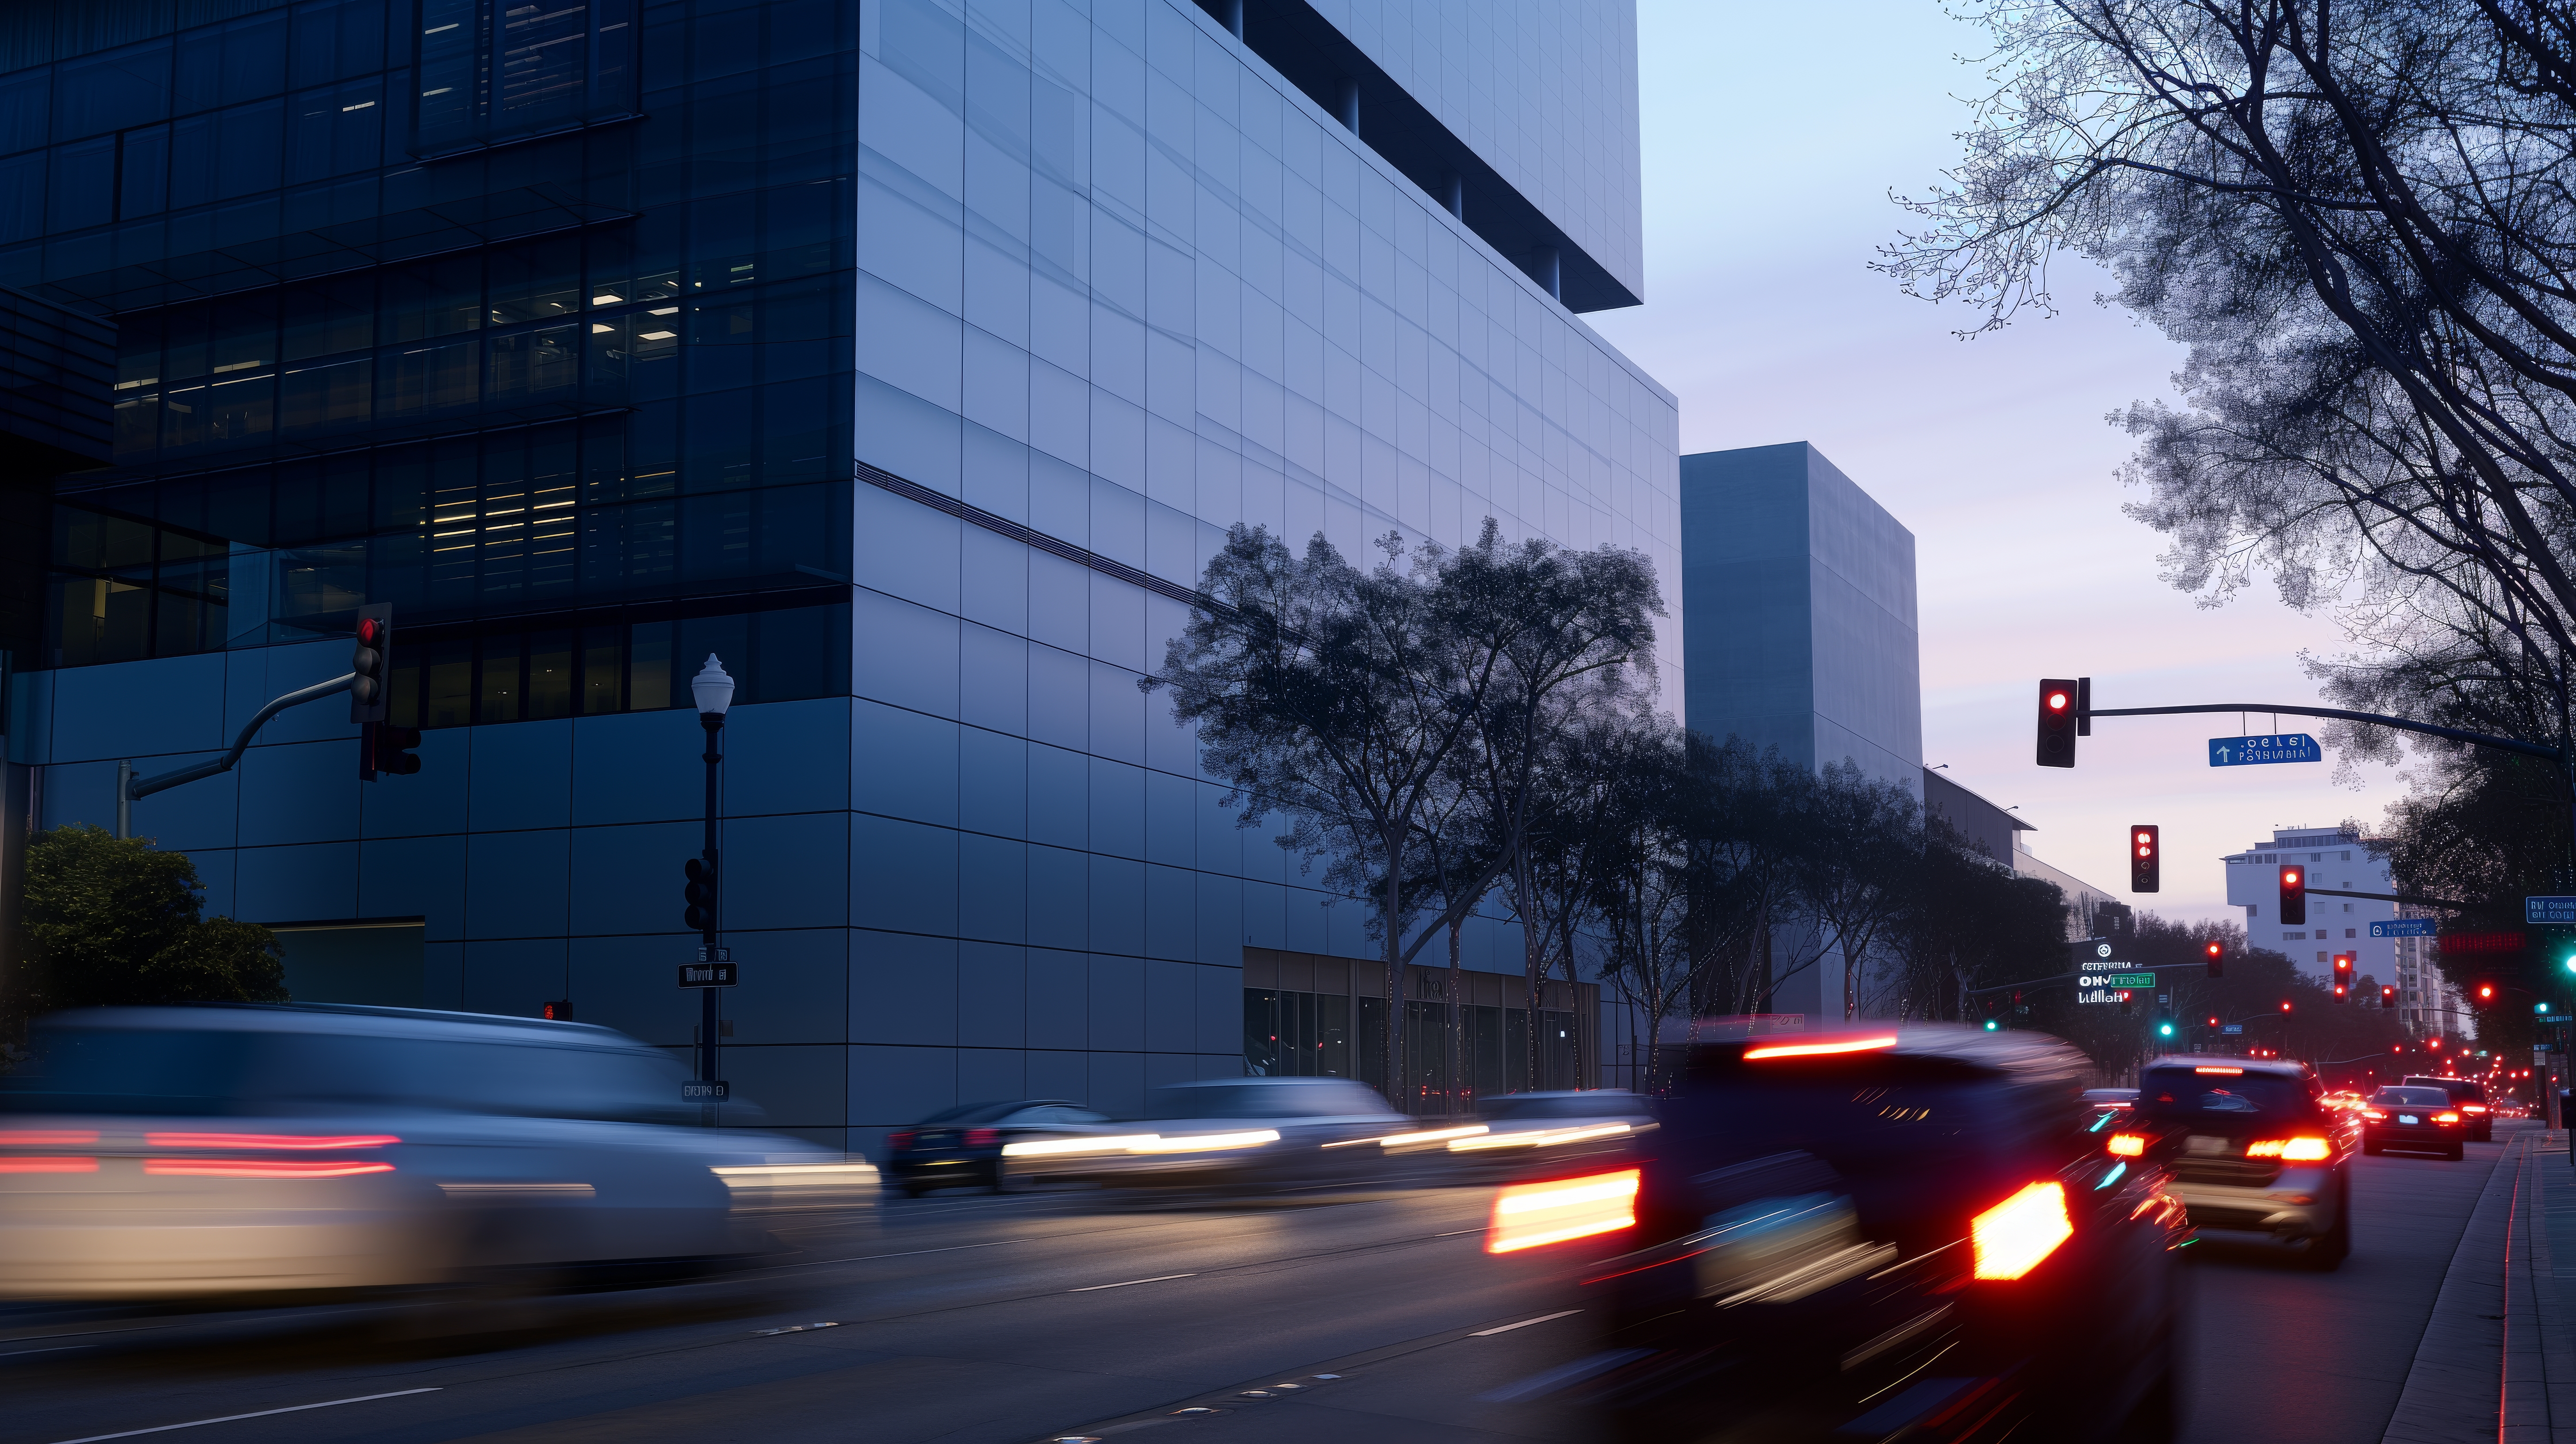 General 5824x3264 AI art Blue hour road car taillights vehicle motion blur blurred traffic lights rear view building trees